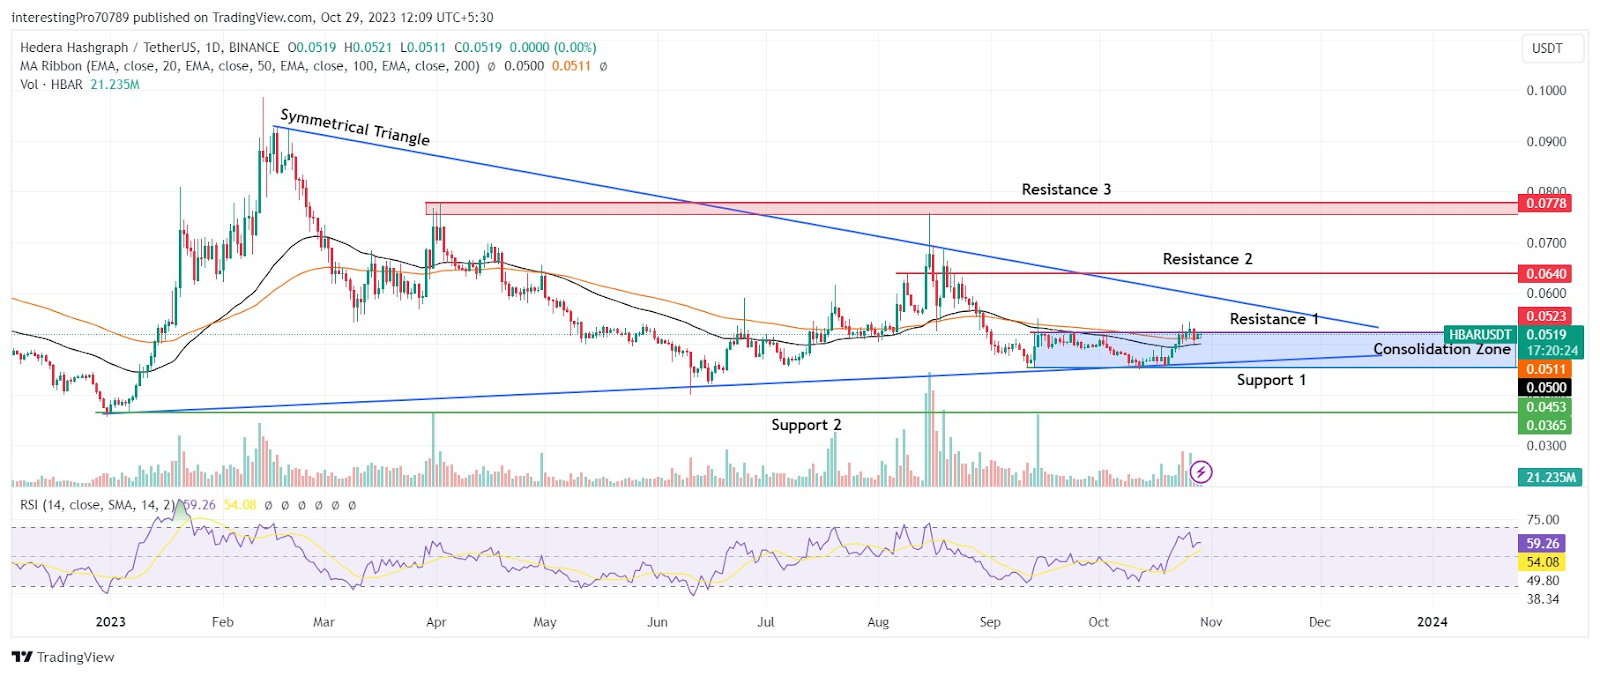 HBAR Coin: Will Price Give the Breakout of $0.0523 Resistance?
